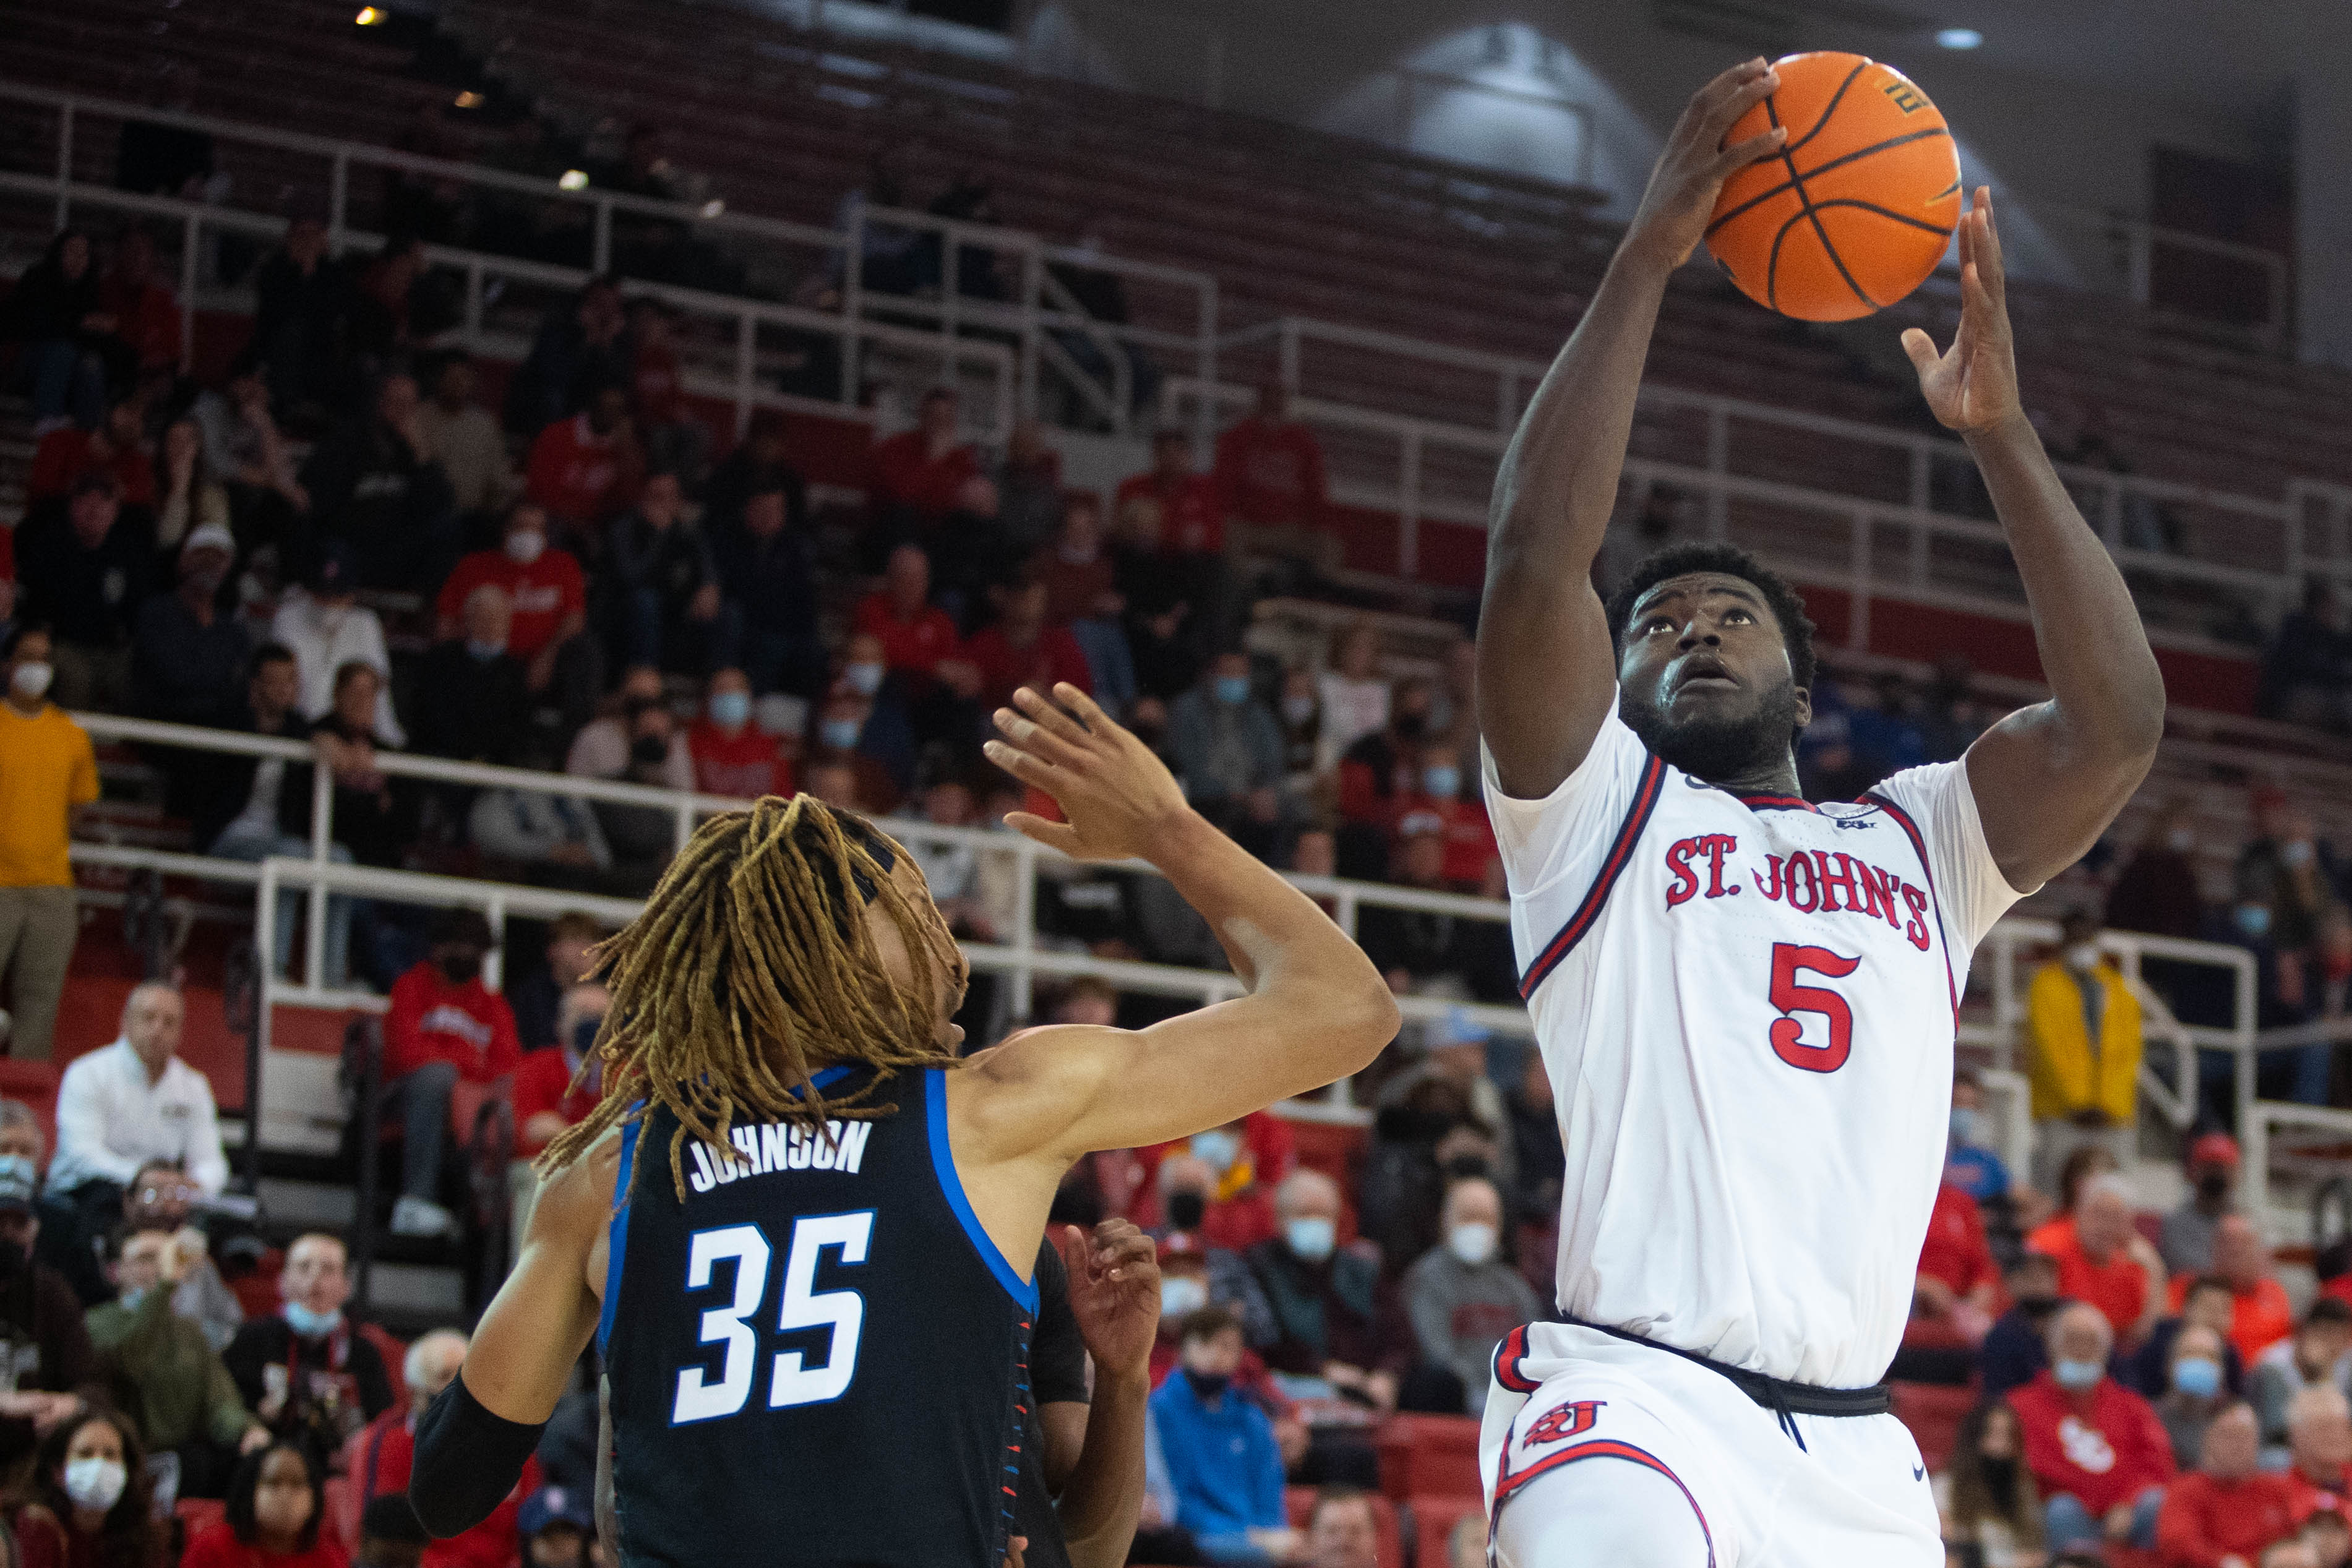 St. John's comes off of a two-and-a-half week pause because of COVID positives to knock off DePaul in the Red Storm's Big East opener, 89-84.